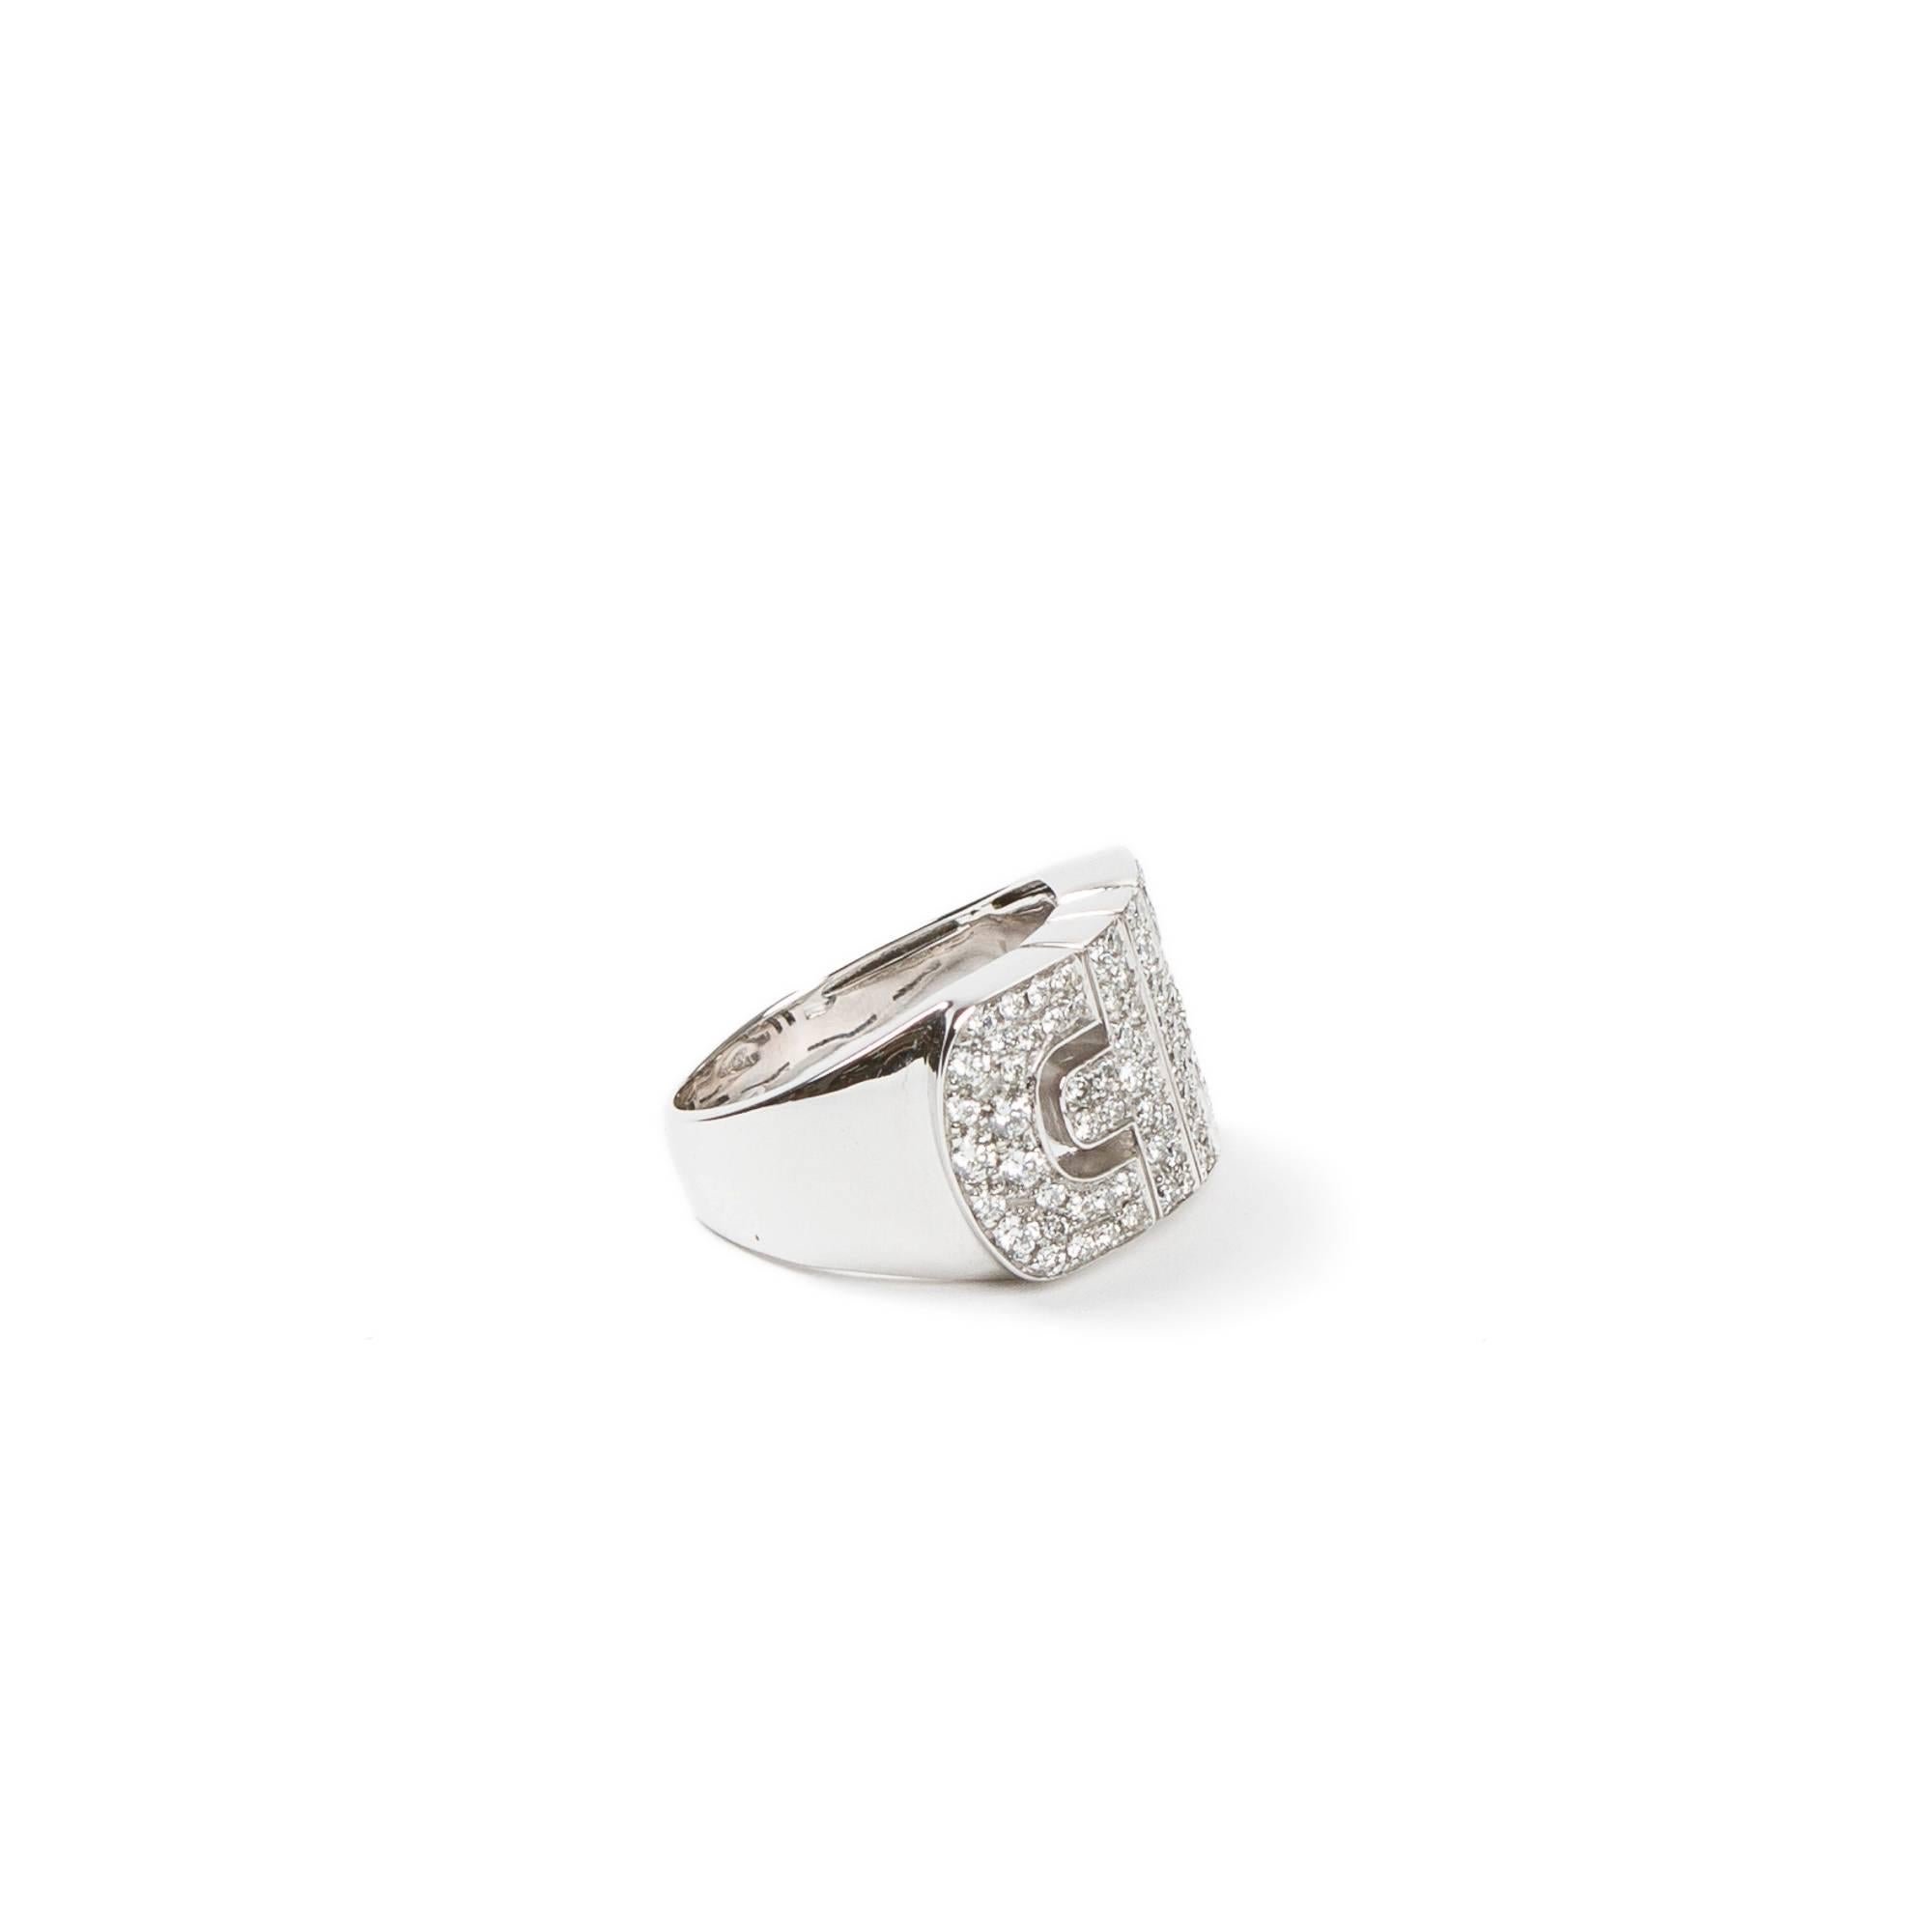 Parentesi ring in 750 white gold with paved diamonds. Hallmarks inside of the ring 